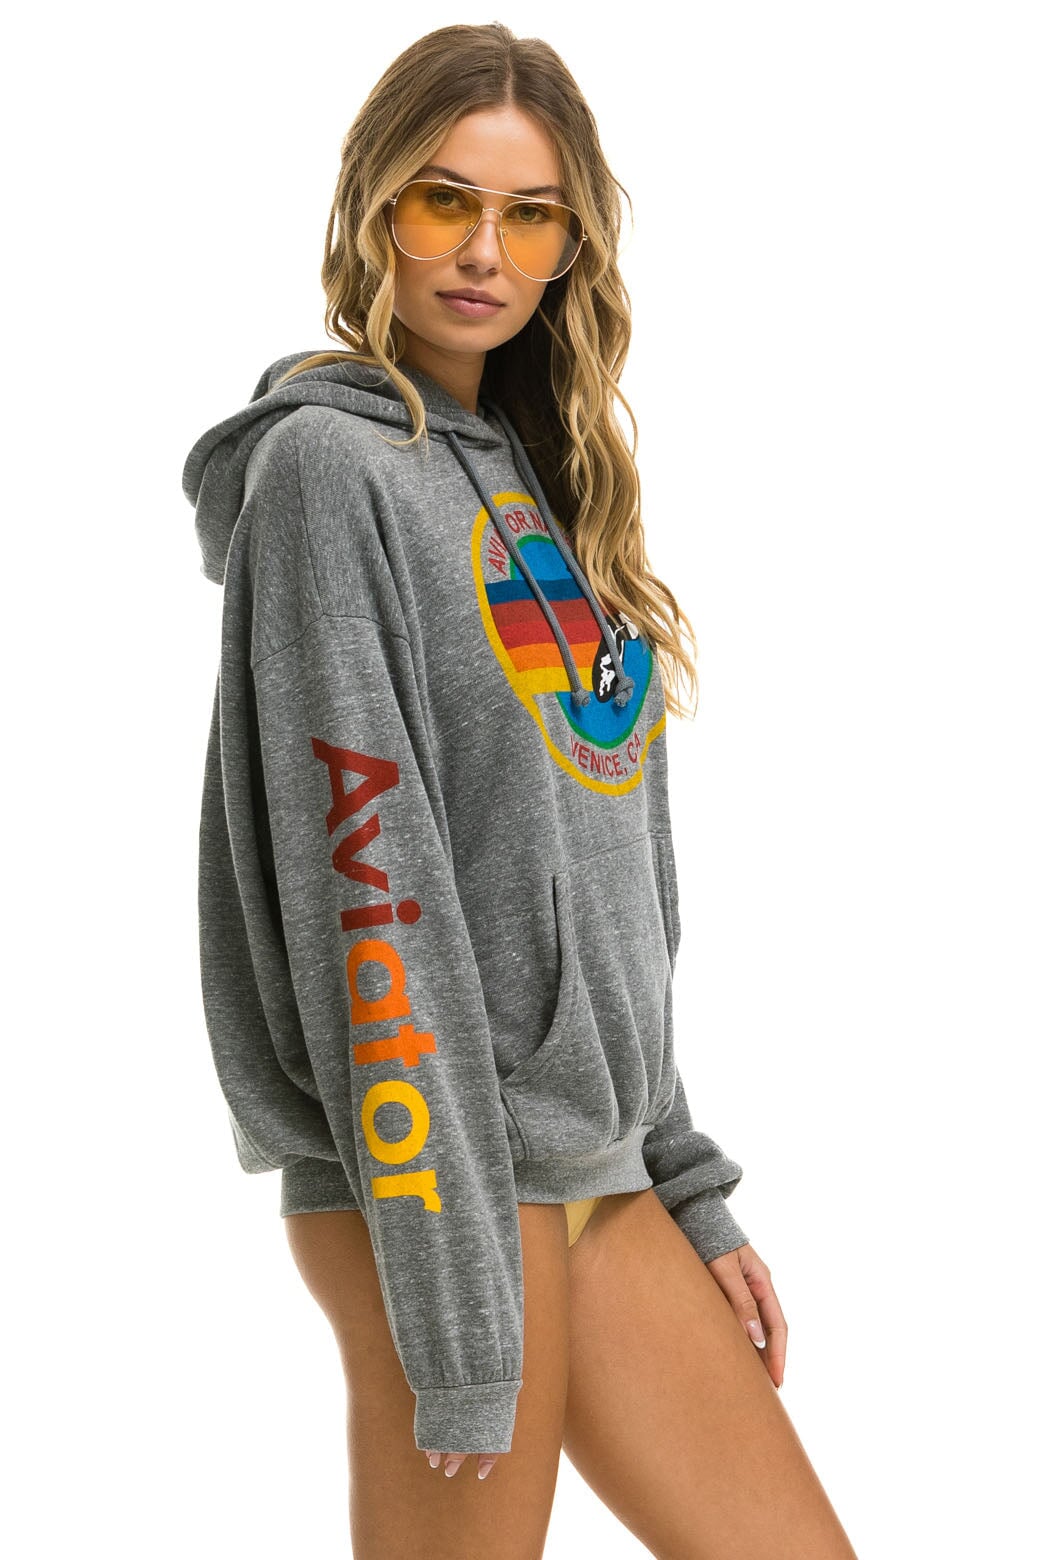 AVIATOR NATION RELAXED PULLOVER HOODIE - HEATHER GREY Hoodie Aviator Nation 